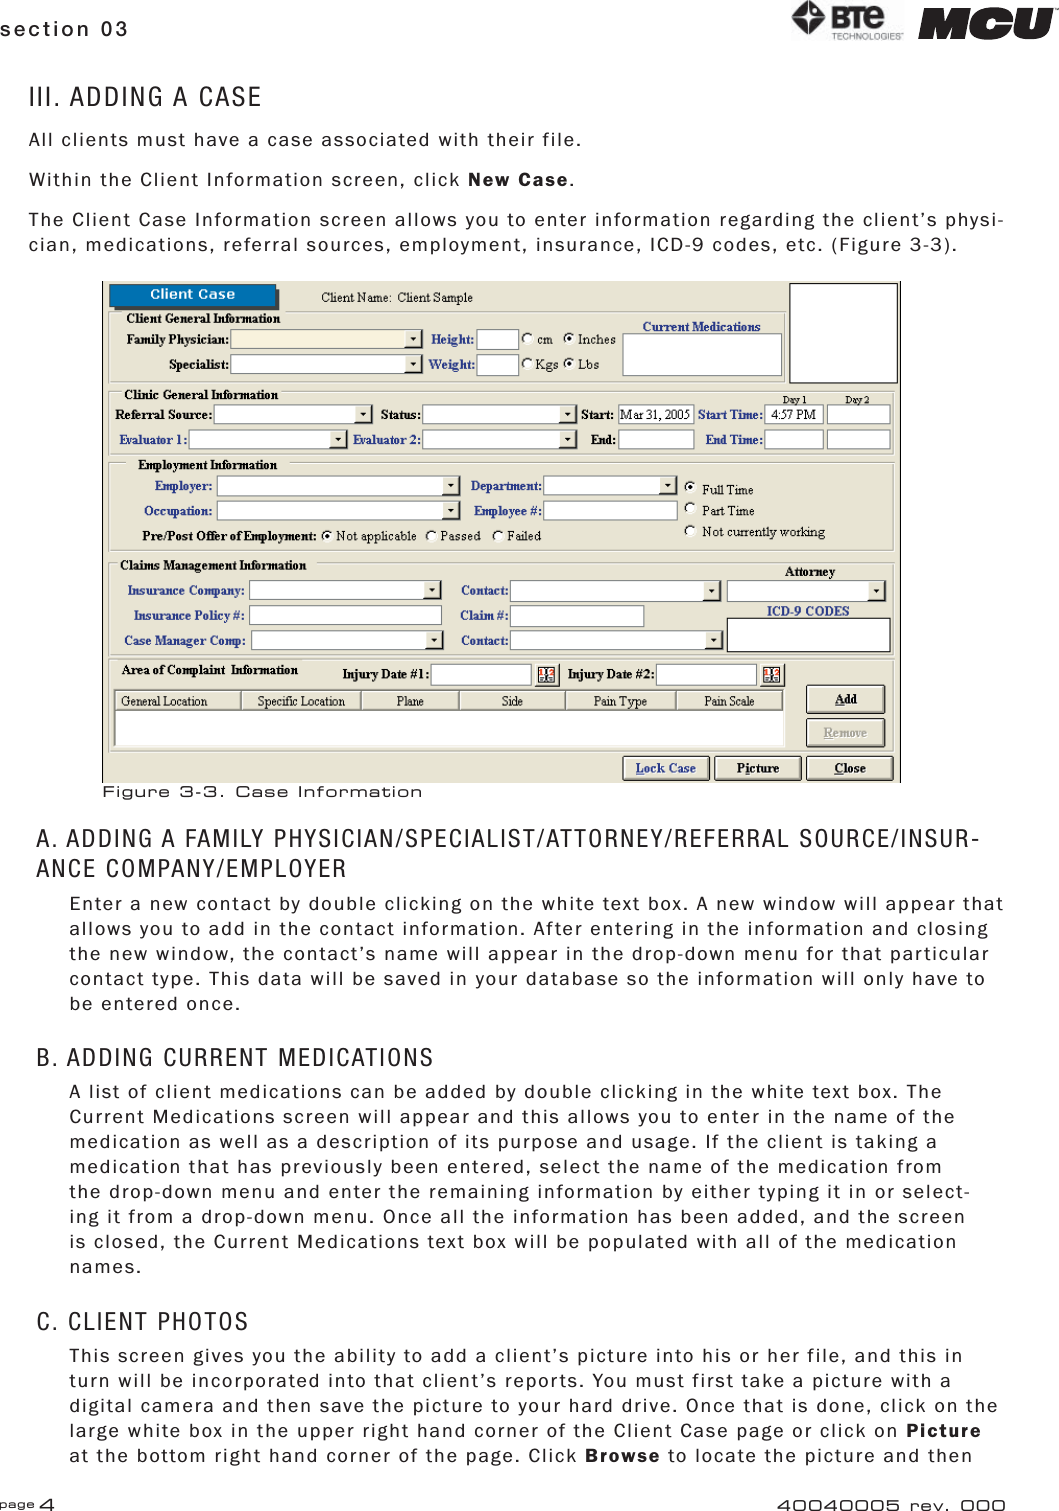 page 4section 03 40040005 rev. 000III. ADDING A CASEAll clients must have a case associated with their file.Within the Client Information screen, click New Case.The Client Case Information screen allows you to enter information regarding the client’s physi-cian, medications, referral sources, employment, insurance, ICD-9 codes, etc. (Figure 3-3).A. ADDING A FAMILY PHYSICIAN/SPECIALIST/ATTORNEY/REFERRAL SOURCE/INSUR-ANCE COMPANY/EMPLOYEREnter a new contact by double clicking on the white text box. A new window will appear that allows you to add in the contact information. After entering in the information and closing the new window, the contact’s name will appear in the drop-down menu for that particular contact type. This data will be saved in your database so the information will only have to be entered once.B. ADDING CURRENT MEDICATIONSA list of client medications can be added by double clicking in the white text box. The Current Medications screen will appear and this allows you to enter in the name of the medication as well as a description of its purpose and usage. If the client is taking a medication that has previously been entered, select the name of the medication from the drop-down menu and enter the remaining information by either typing it in or select-ing it from a drop-down menu. Once all the information has been added, and the screen is closed, the Current Medications text box will be populated with all of the medication names.C. CLIENT PHOTOSThis screen gives you the ability to add a client’s picture into his or her file, and this in turn will be incorporated into that client’s reports. You must first take a picture with a digital camera and then save the picture to your hard drive. Once that is done, click on the large white box in the upper right hand corner of the Client Case page or click on Picture at the bottom right hand corner of the page. Click Browse to locate the picture and then Figure 3-3. Case Information